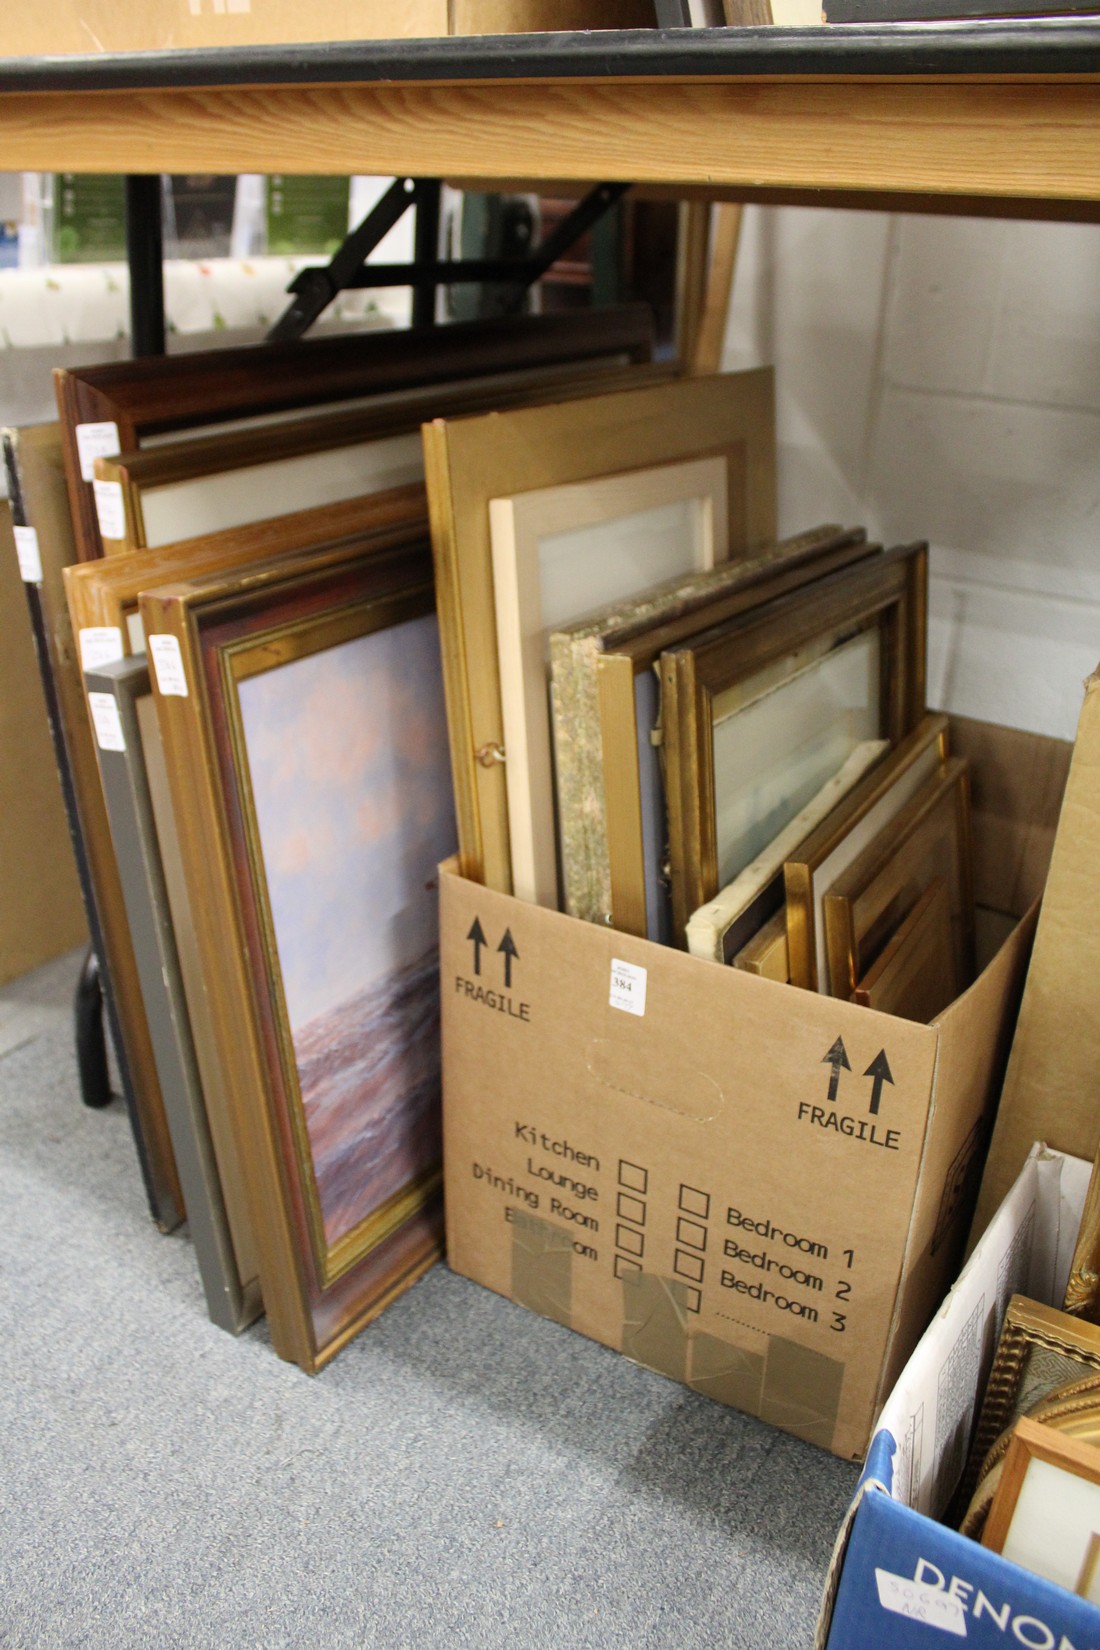 A quantity of paintings and prints.